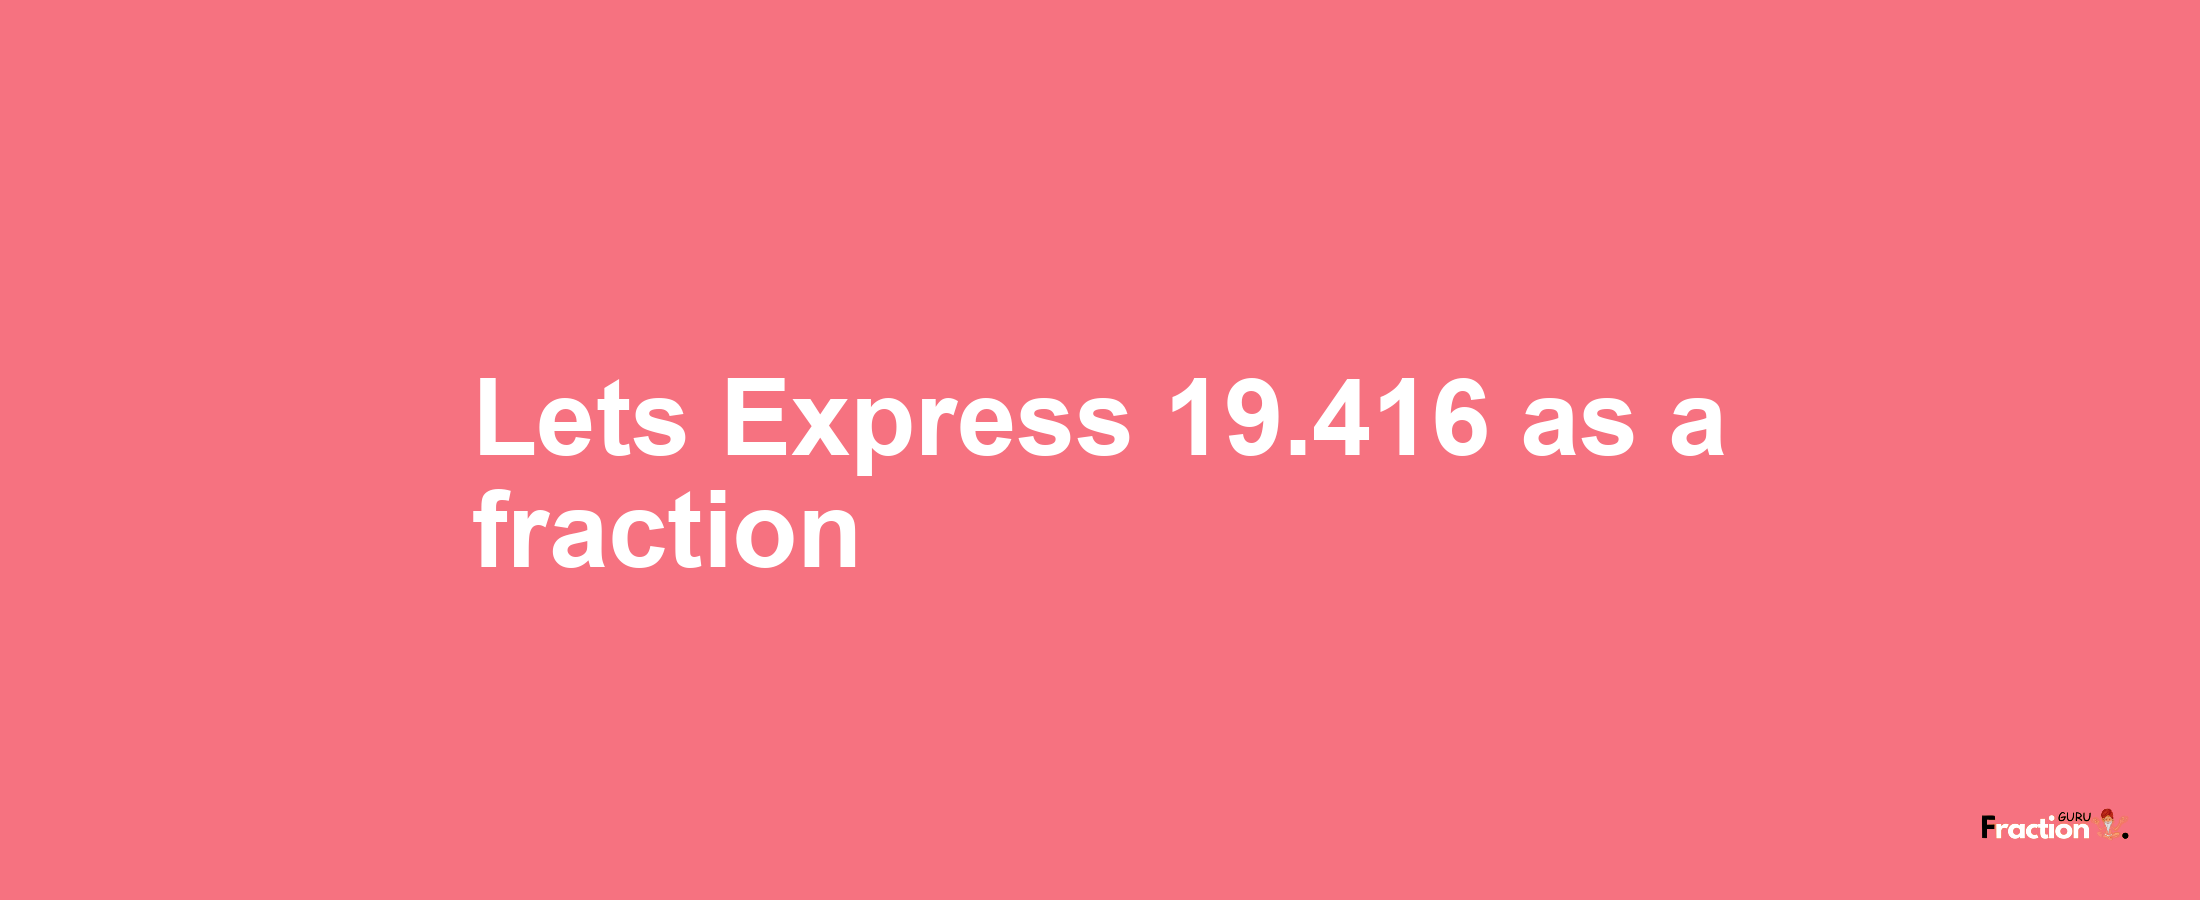 Lets Express 19.416 as afraction